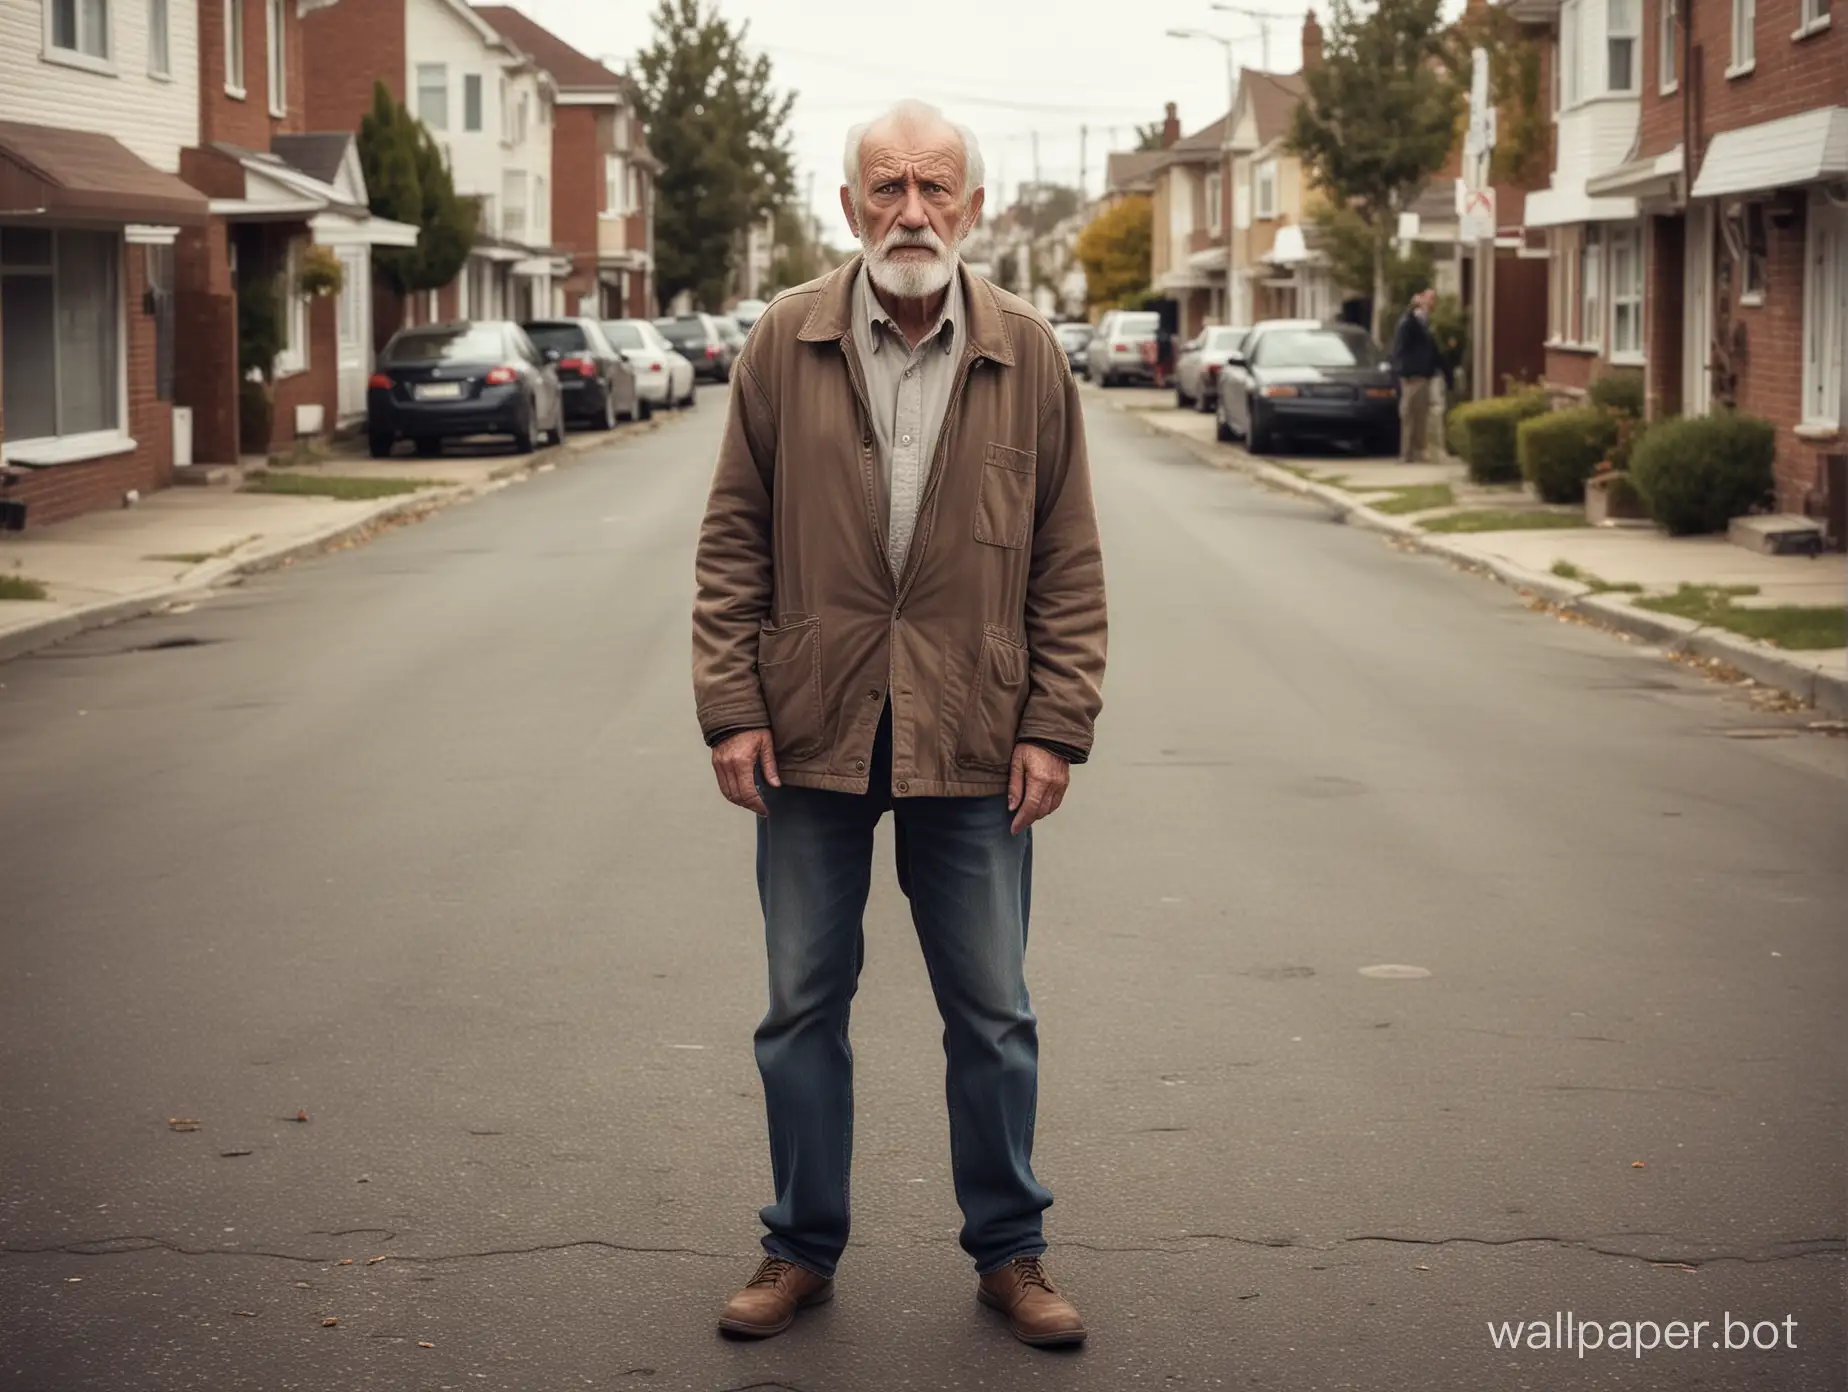 Old man with attitude in an altercation with young people, full body view, detailed features, sharp image. Suburban street setting.